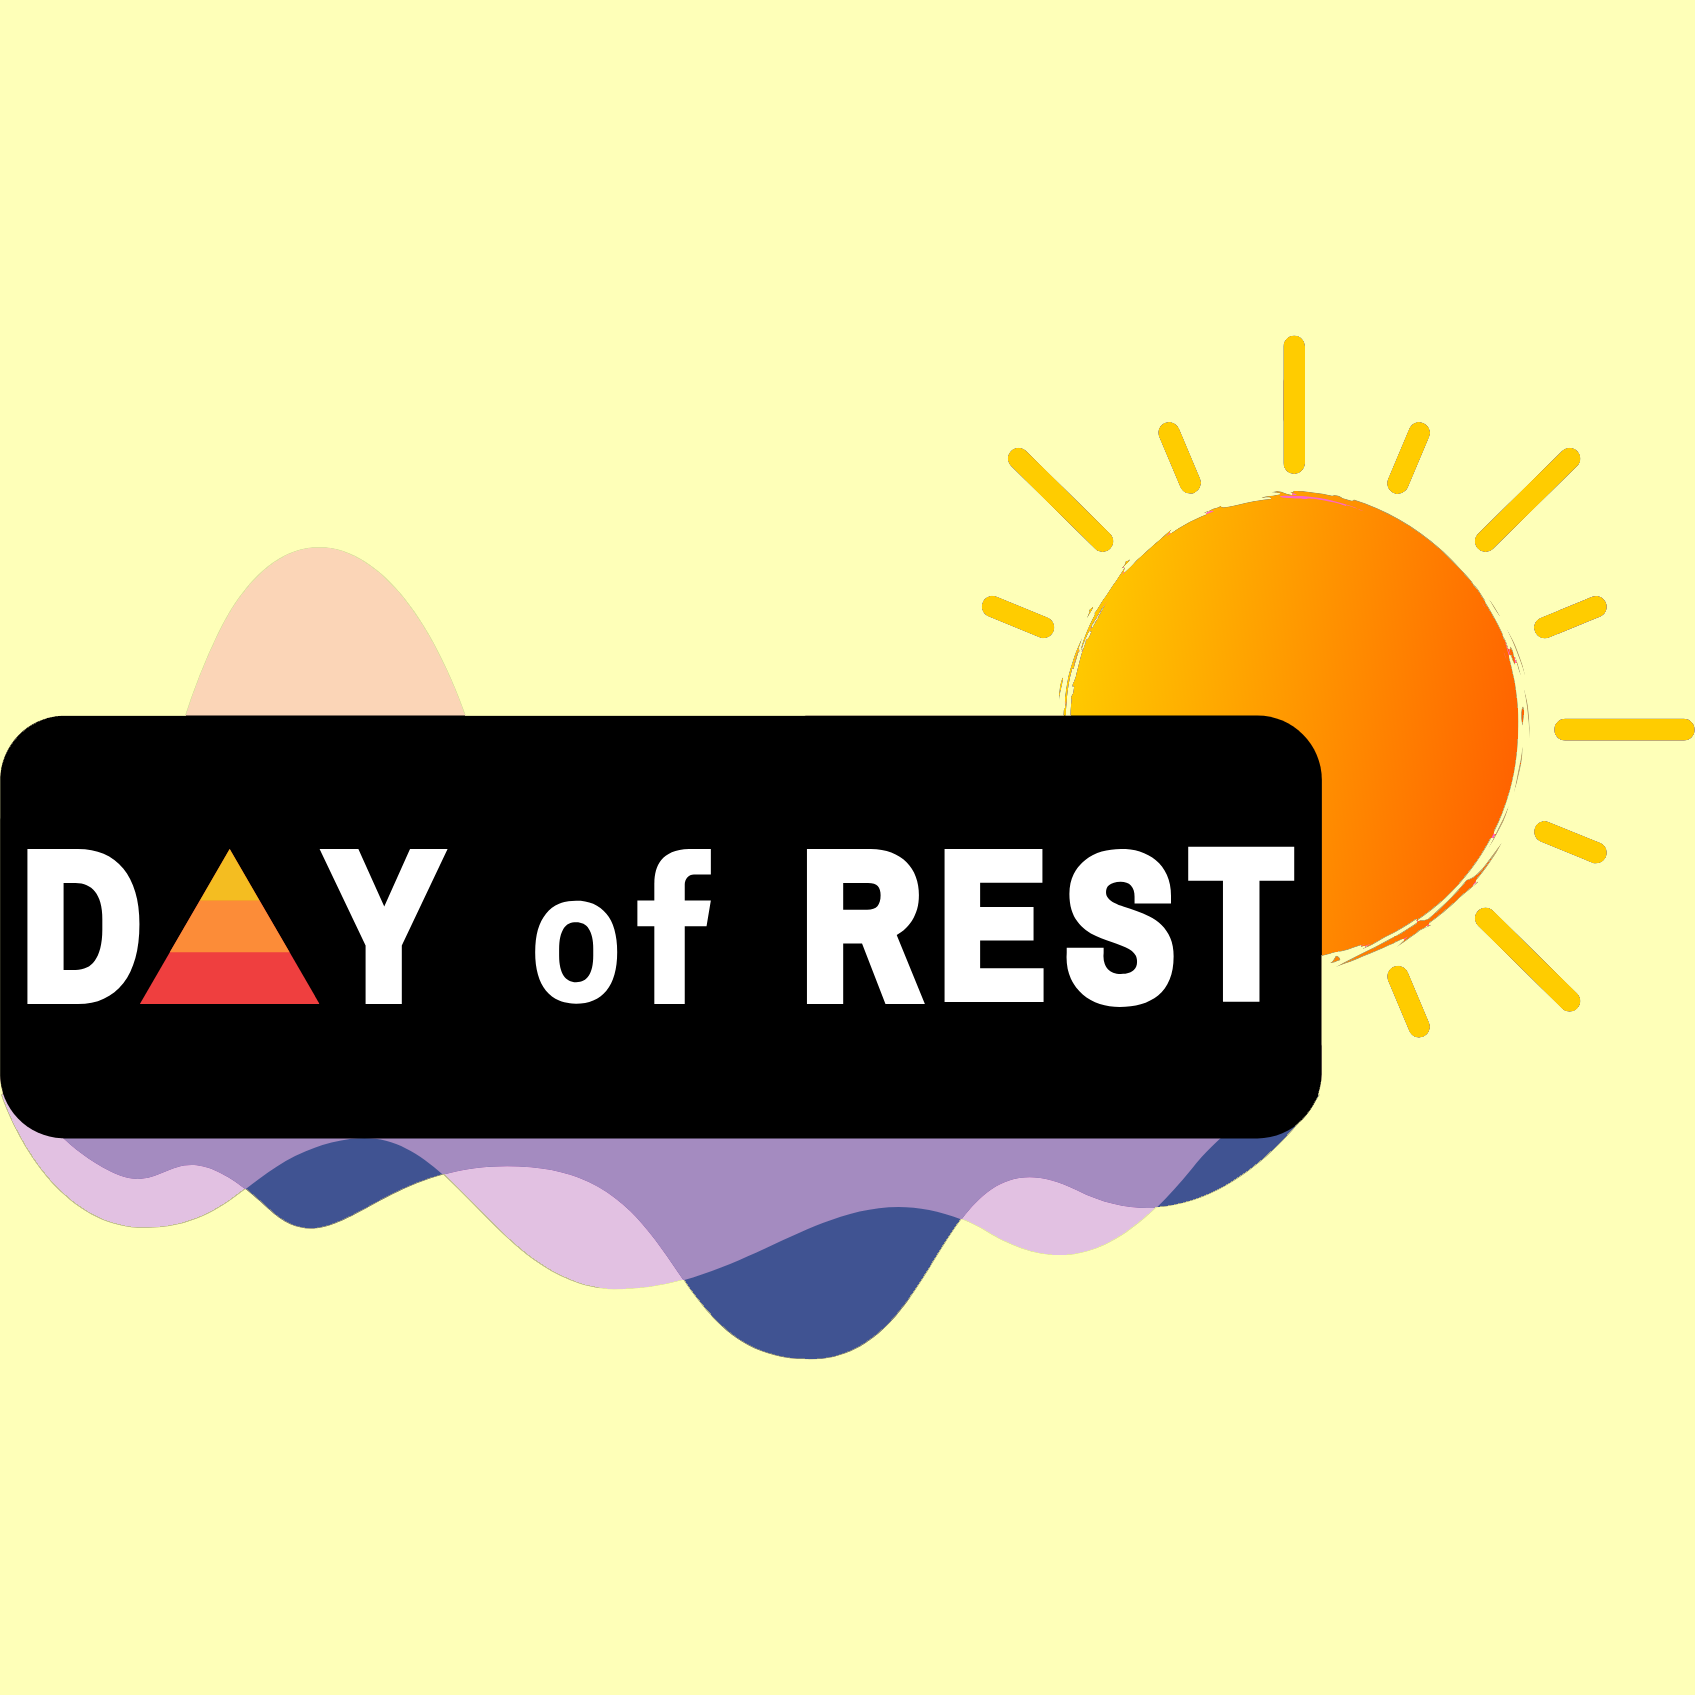 2 rest days in a row